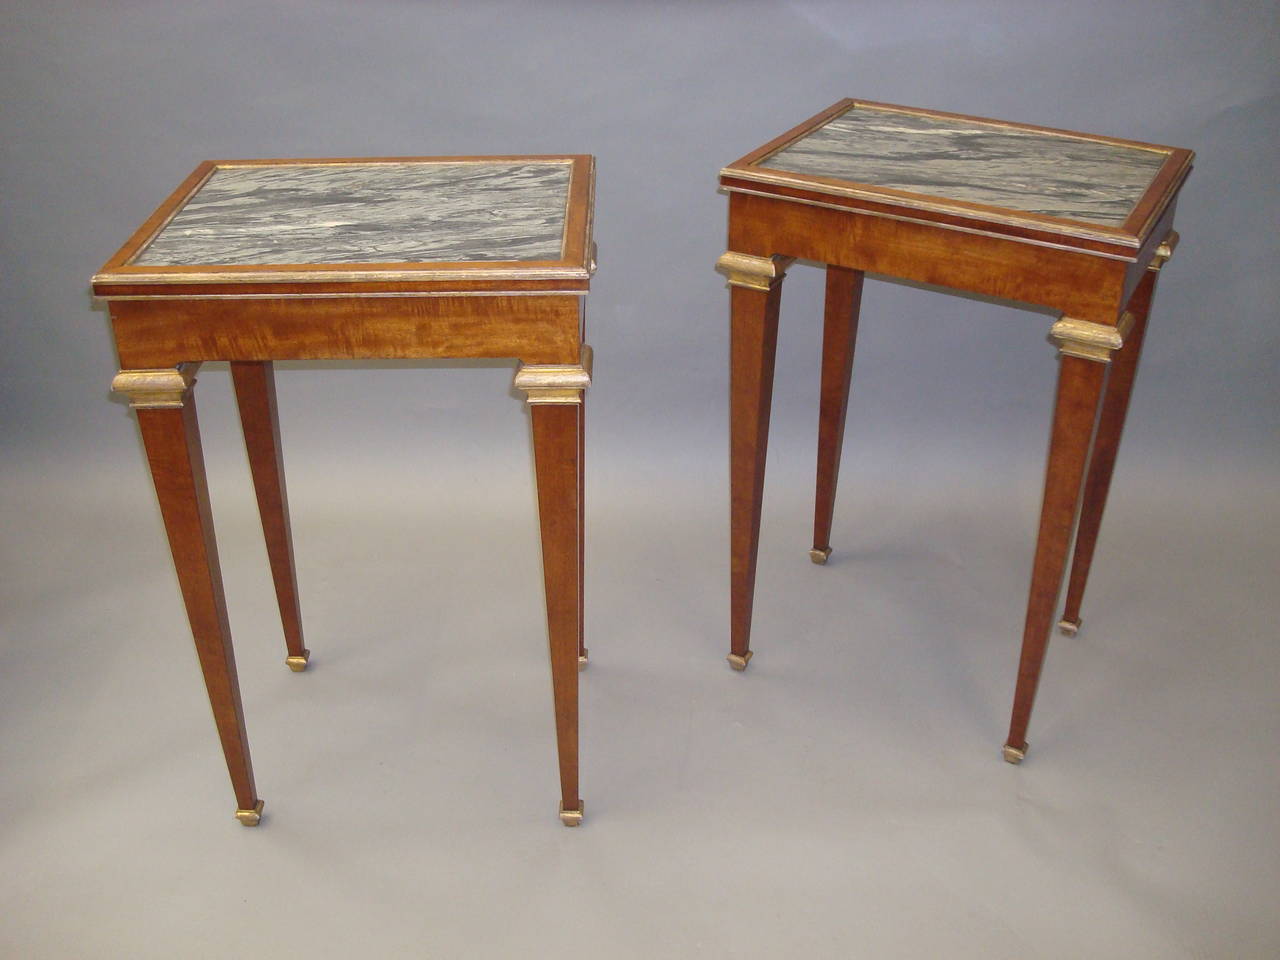 A stylish 19th century pair of mahogany, marble top, end tables; the grey 'Bleu Tigre' rectangular marble tops inset in a fiddleback mahogany crossbanded frame, with narrow giltwood mouldings; the simple frieze also in fiddleback mahogany raised on